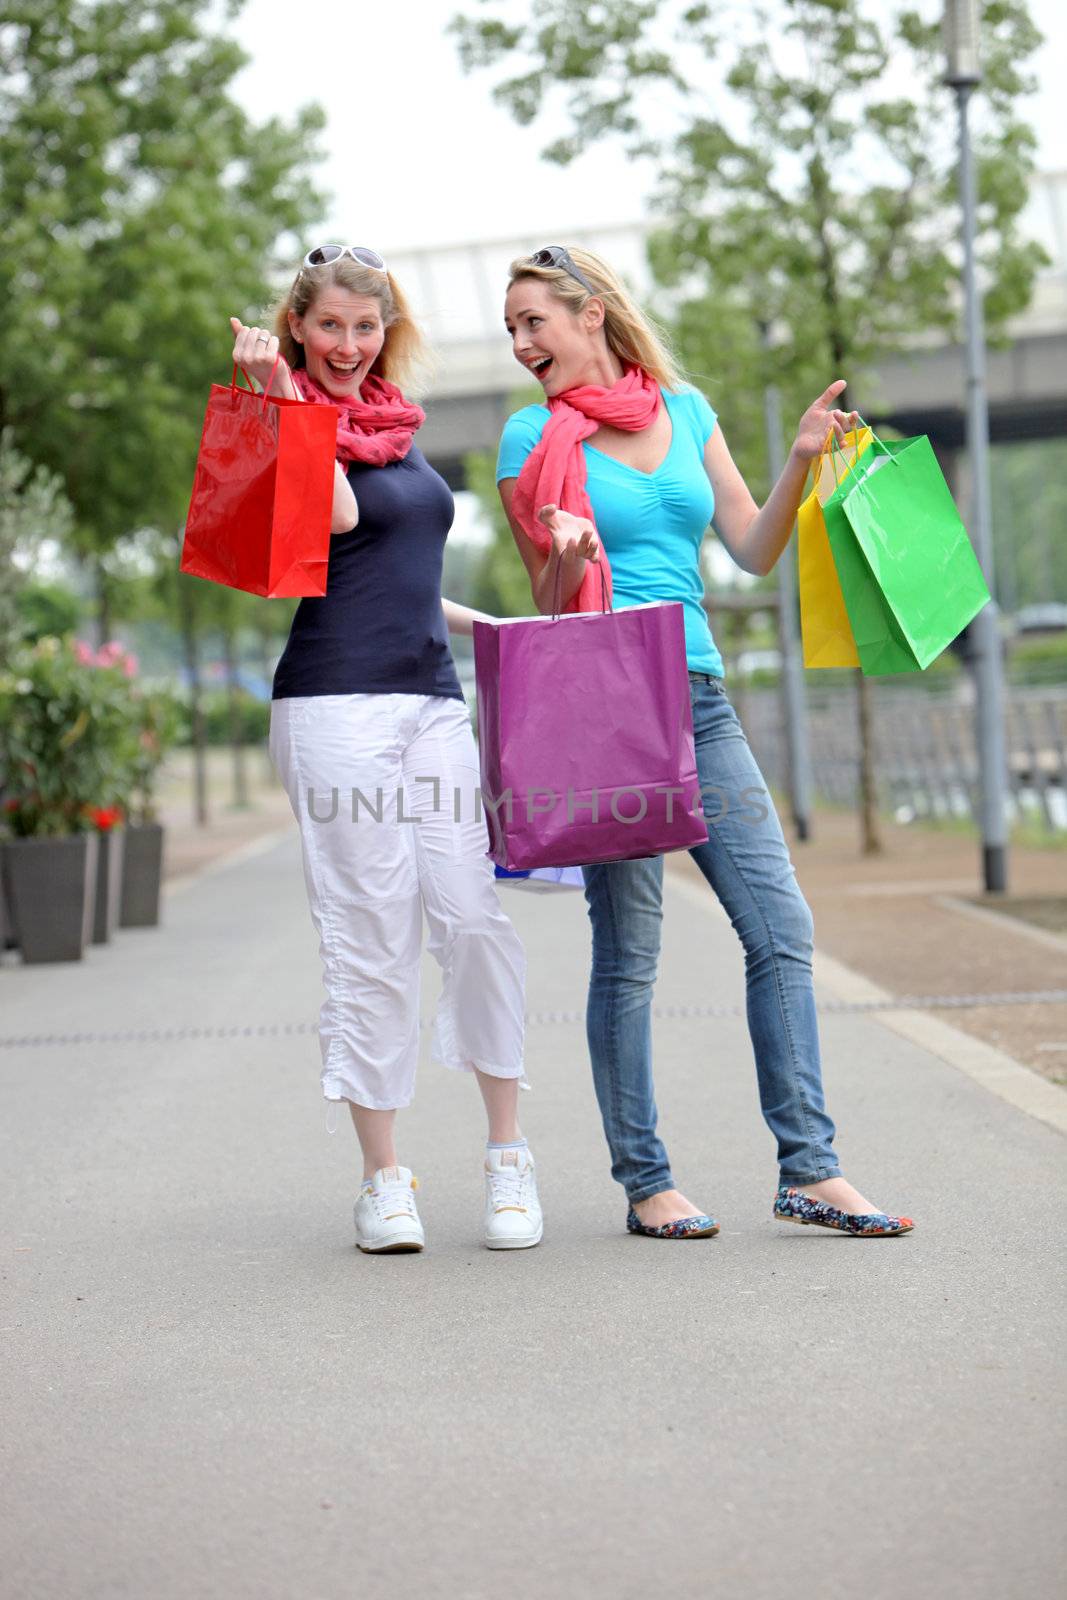 Excited women with their purchases  by Farina6000